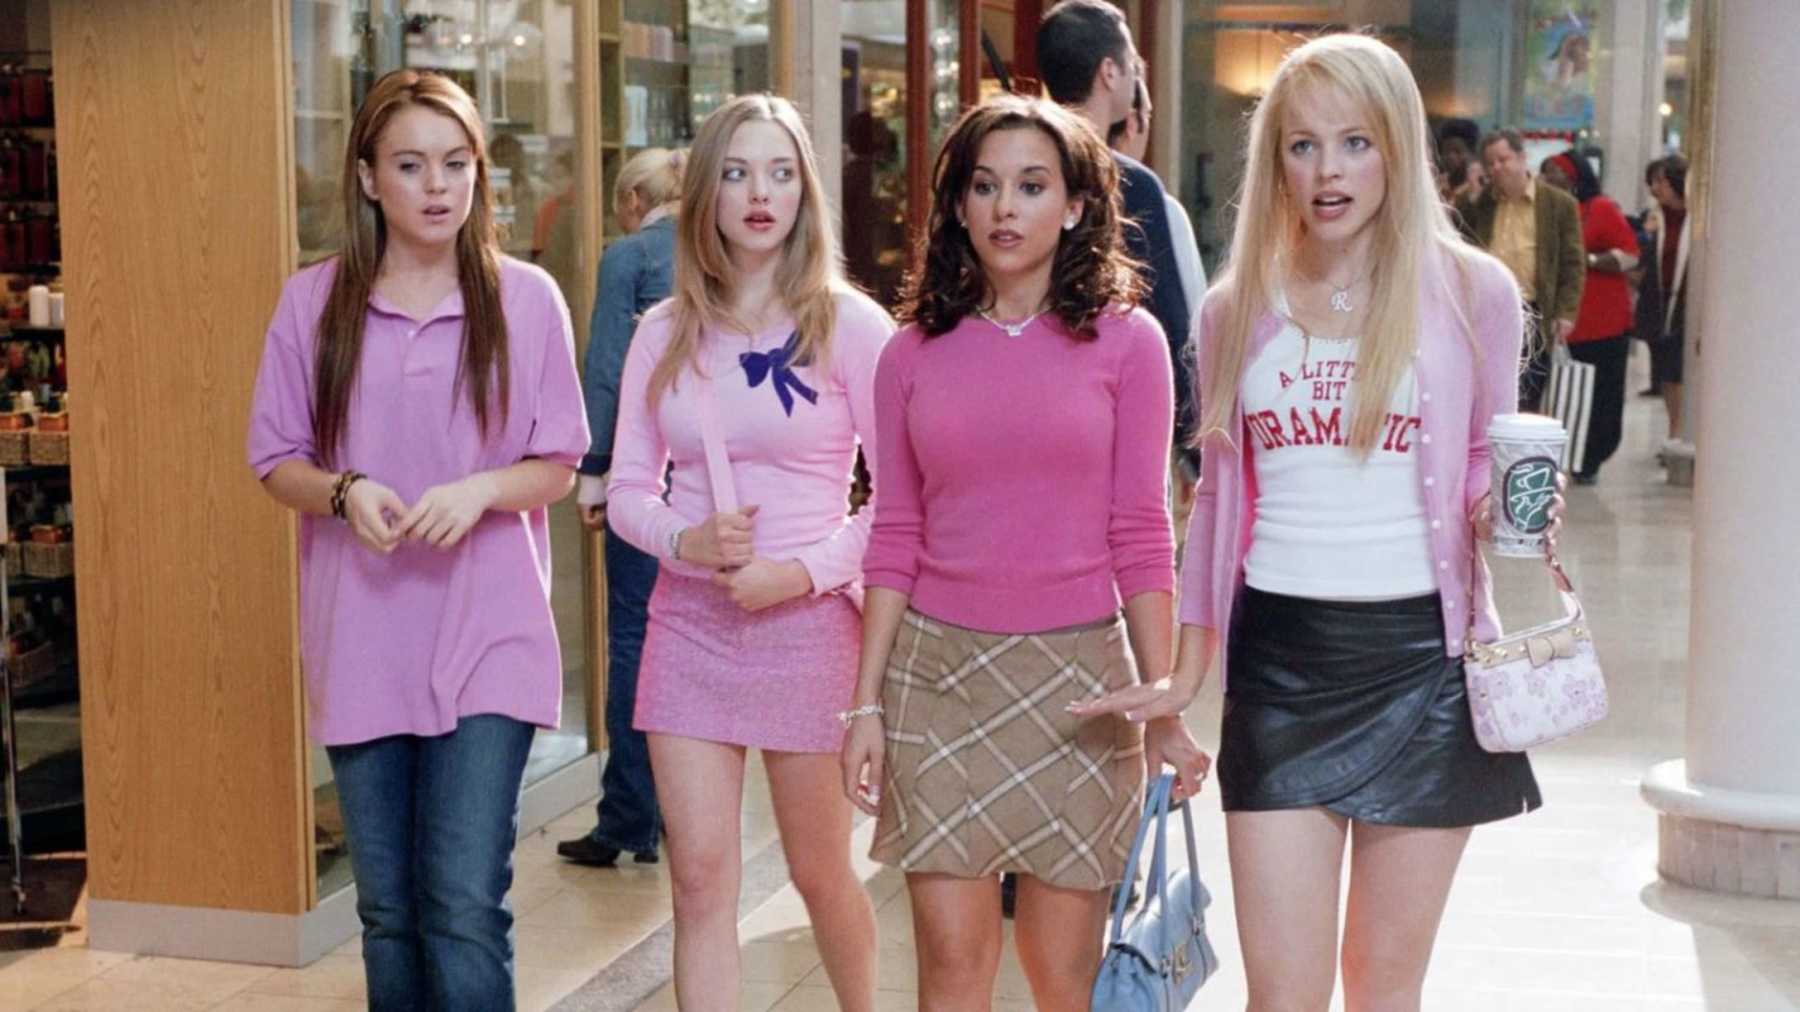 7 'Mean Girls' Halloween Costume Ideas To Make You Stand Out